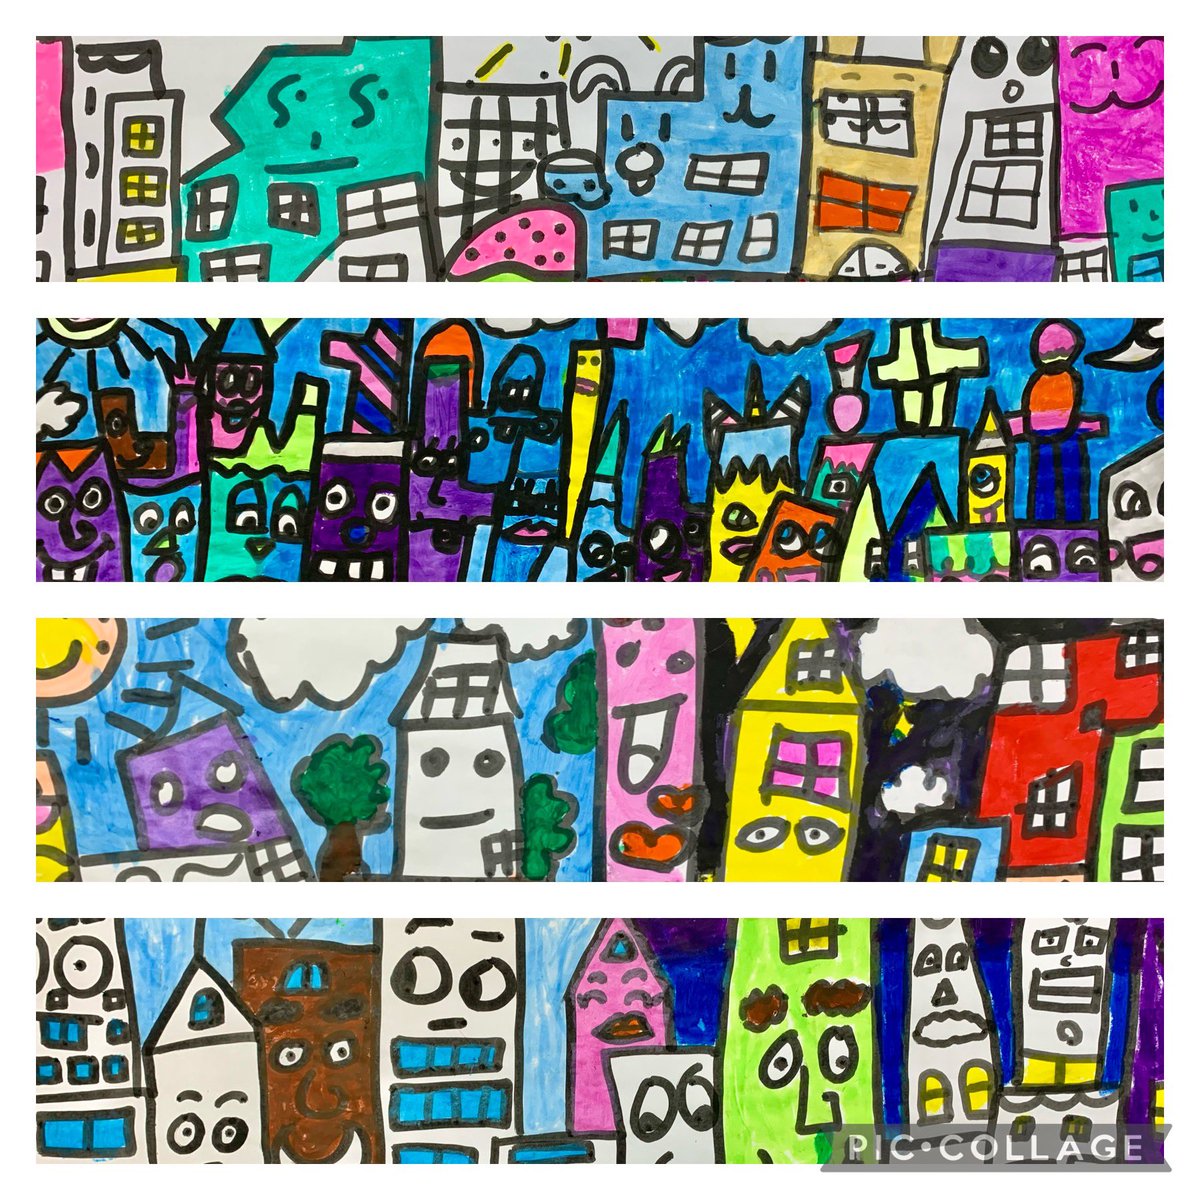 Collaborative cityscapes inspired by James Rizzi❤️💛💙🎨 #ArtSmart